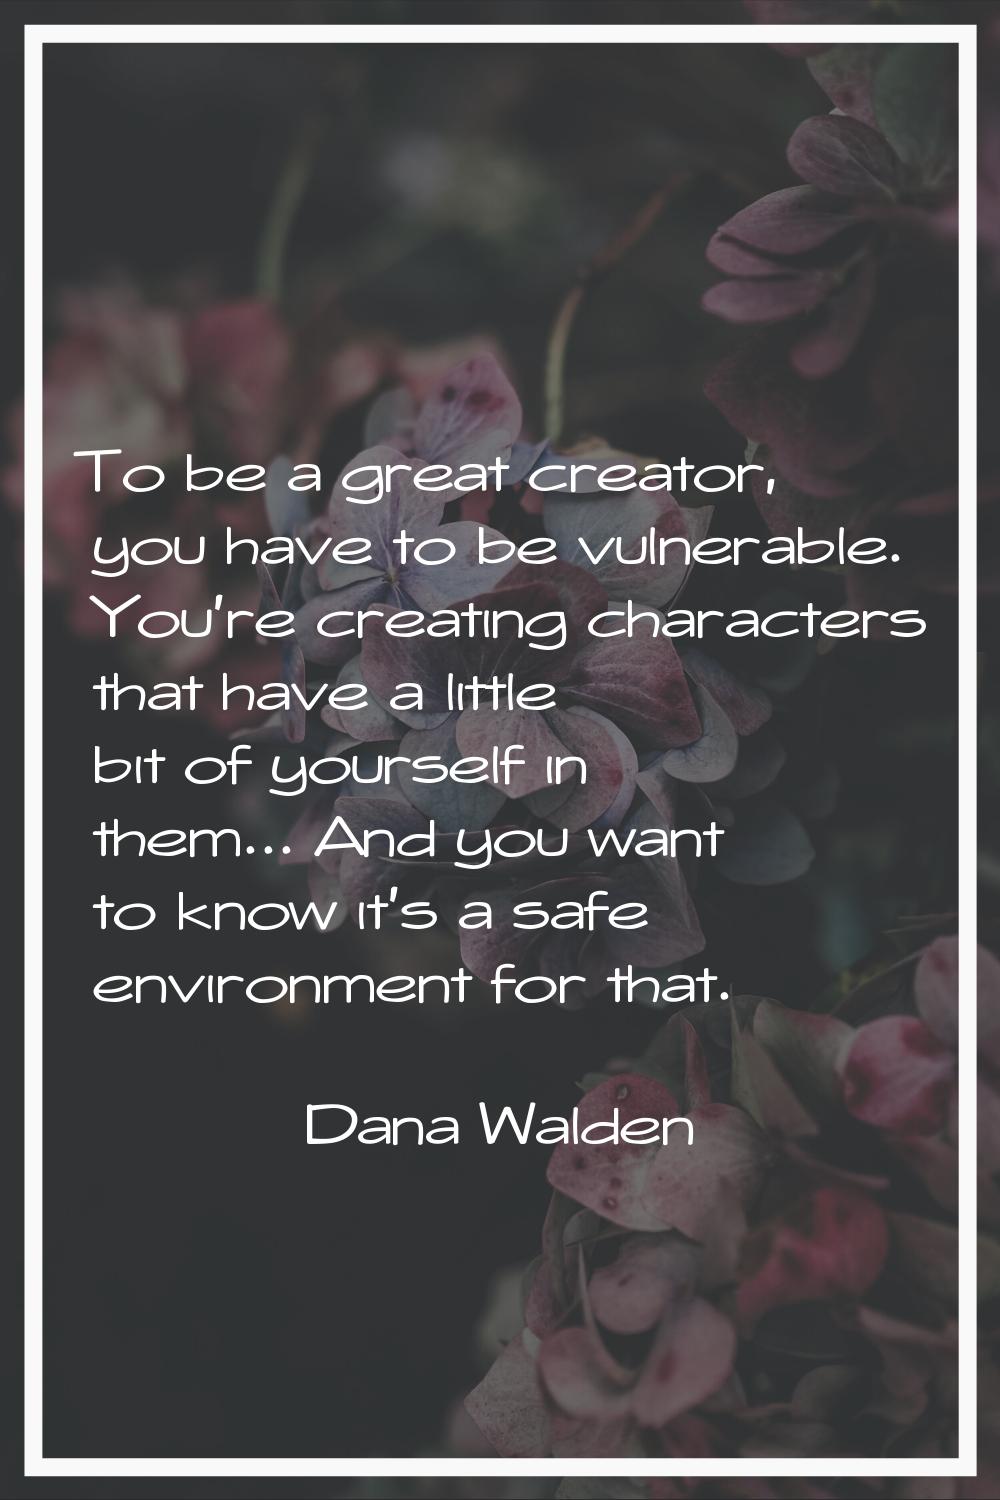 To be a great creator, you have to be vulnerable. You're creating characters that have a little bit